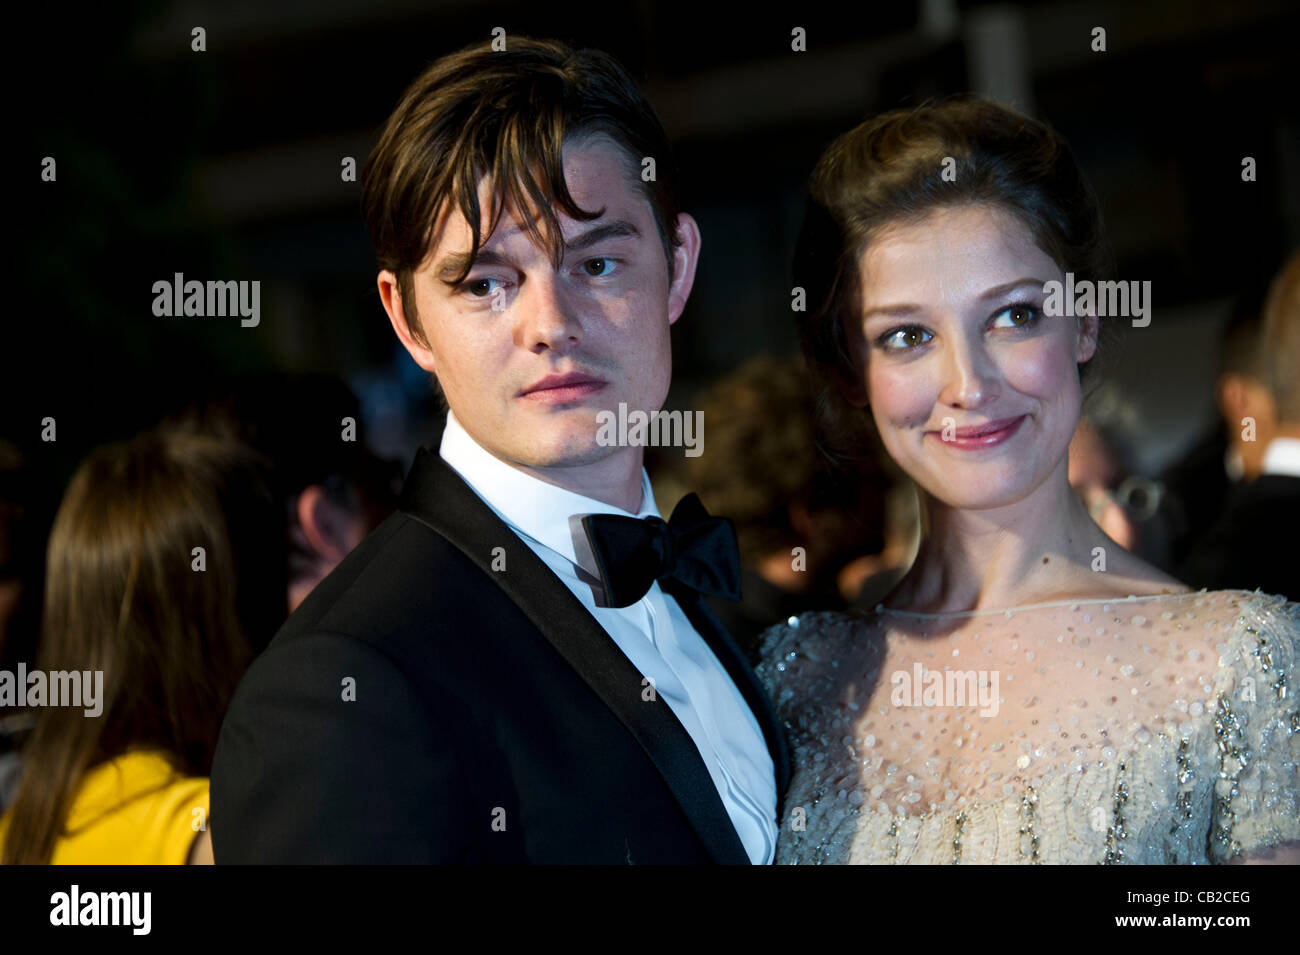 Sam Riley (actor) & guest at red carpet departures for film 'On The Road' 65th Cannes Film Festival 2012 Palais des Festival, Cannes, France Wed 23 May 2012 Stock Photo